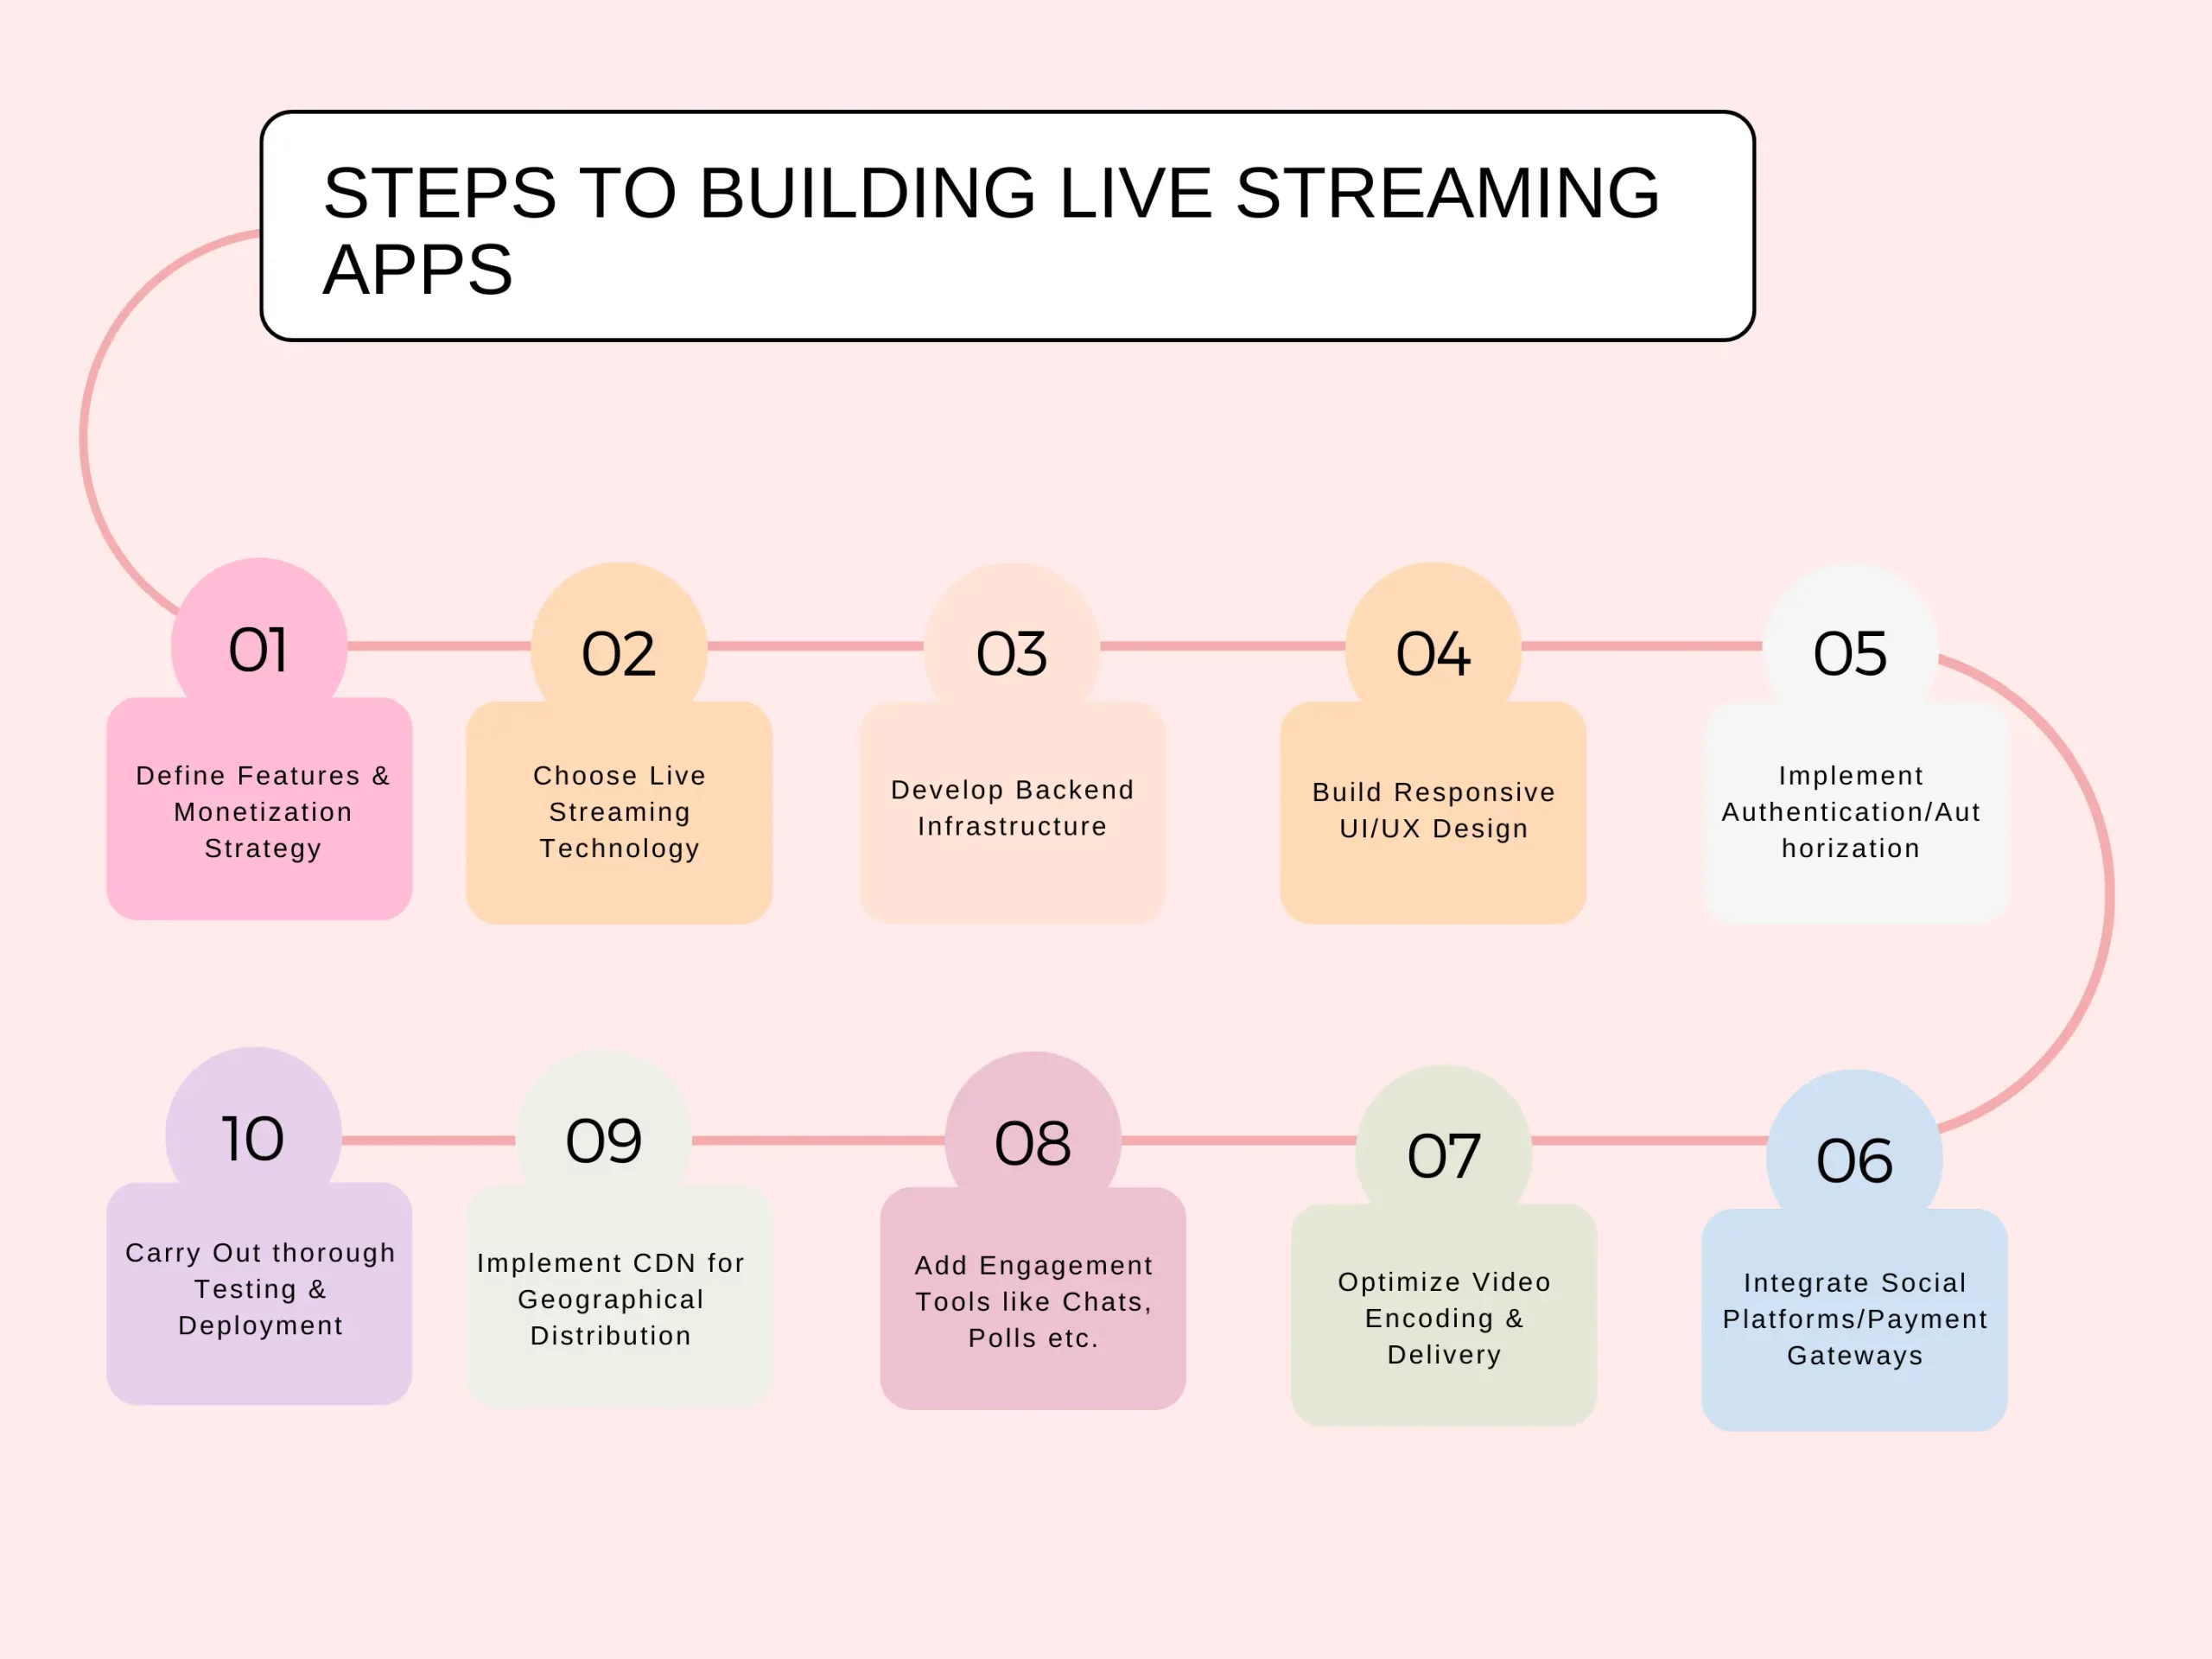 Steps to Building Live Streaming Apps